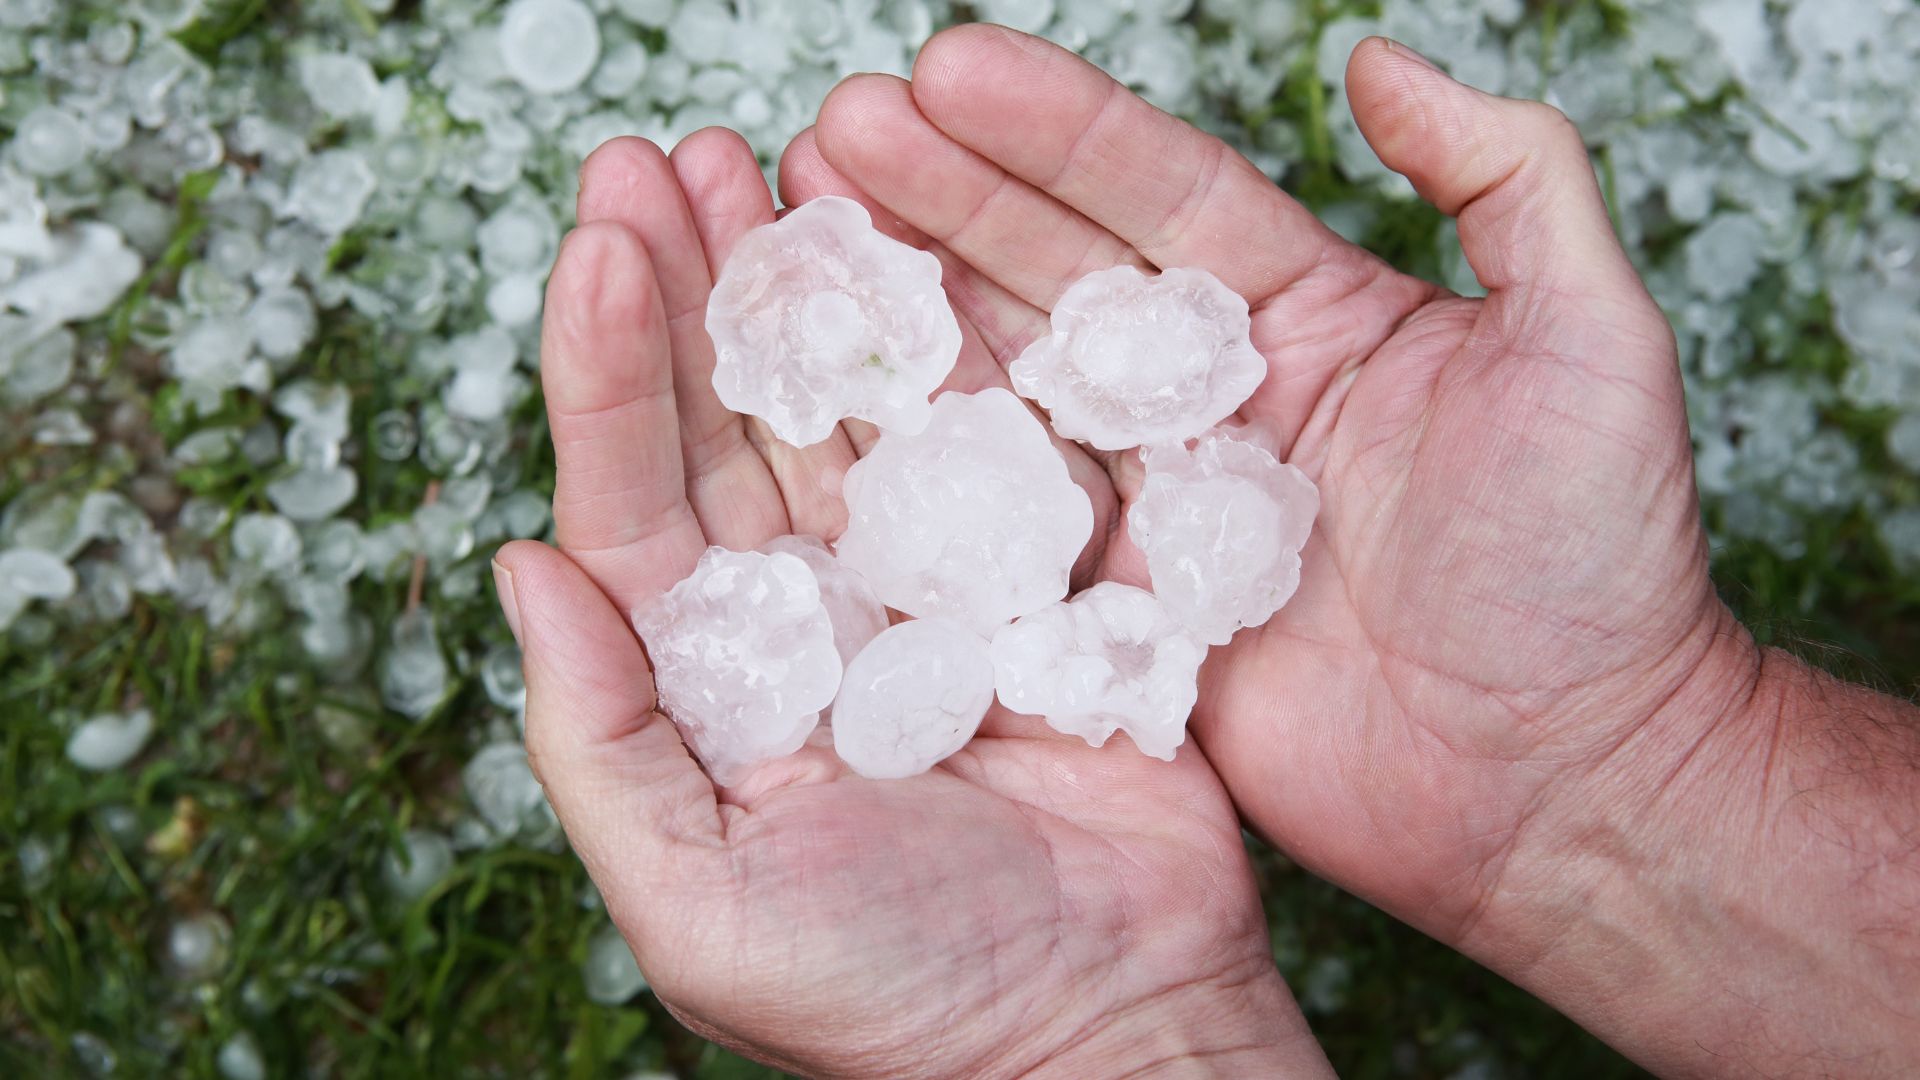 Does Your Insurance Cover Hail Damage?